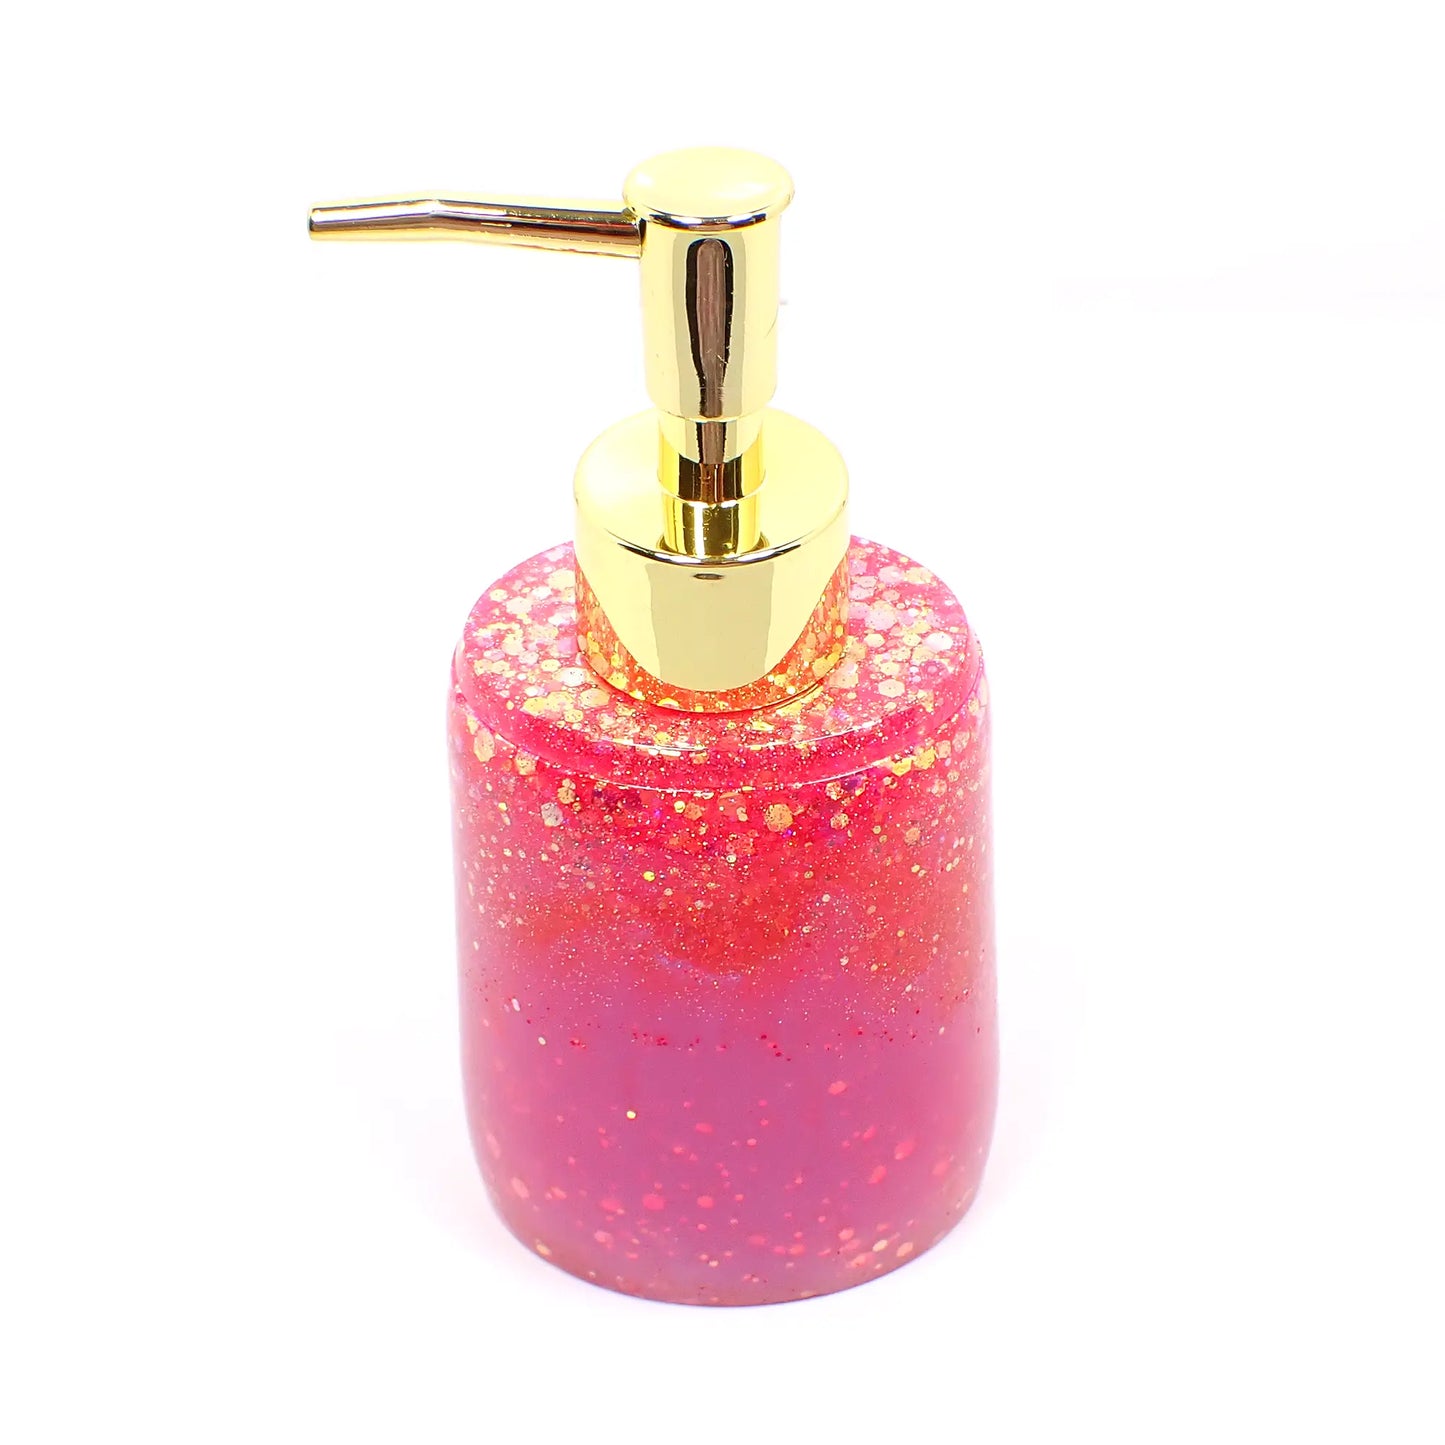 Oval Handmade Bright Pearly Pink and Glitter Resin Soap Dispenser, Lotion Dispenser